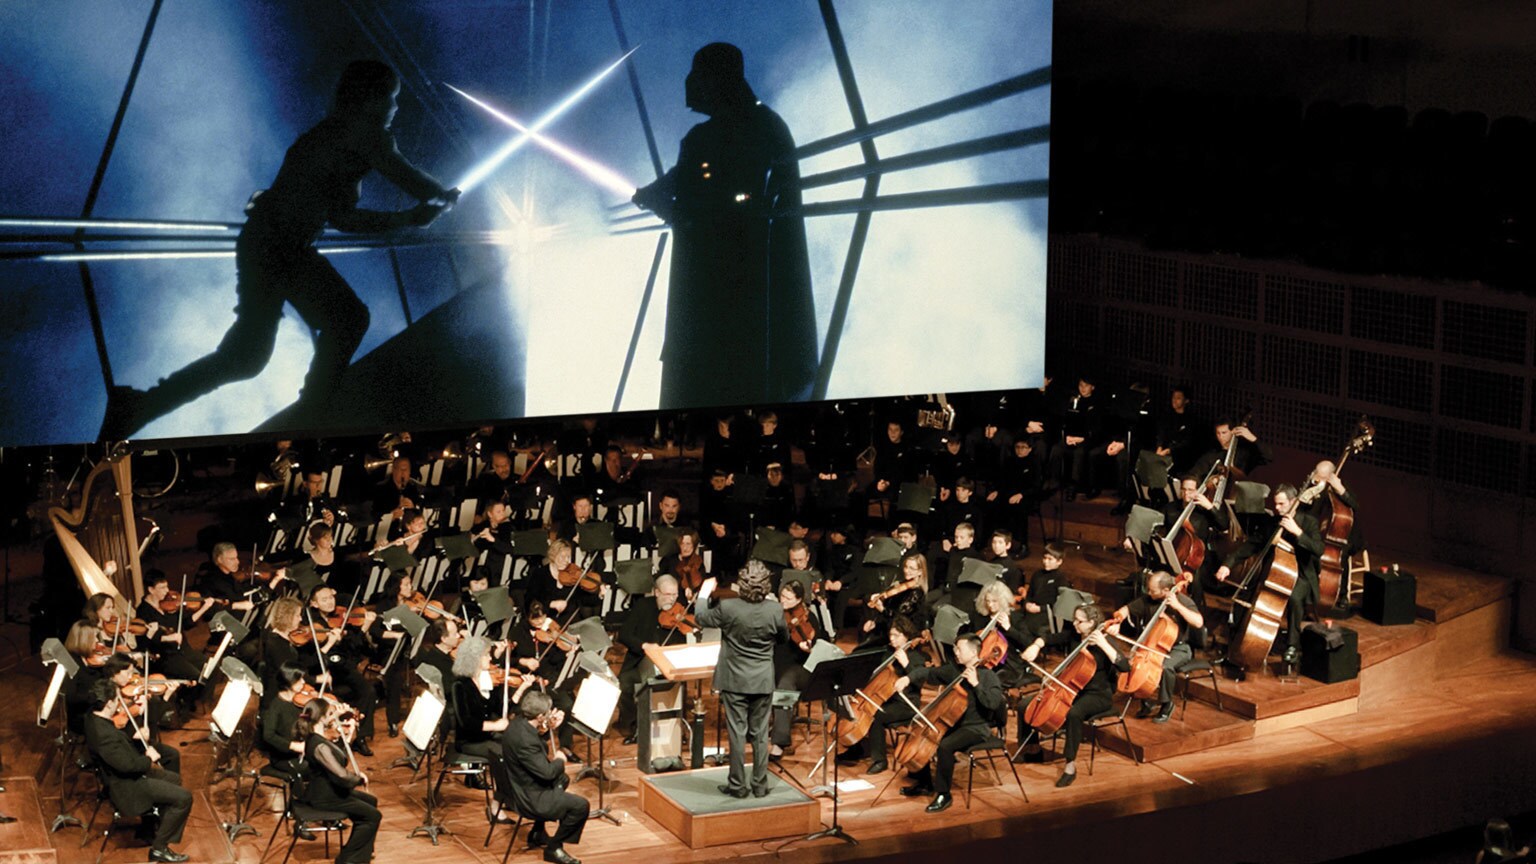 Star Wars at the Symphony: Conductor Emil de Cou’s Path to the Empire